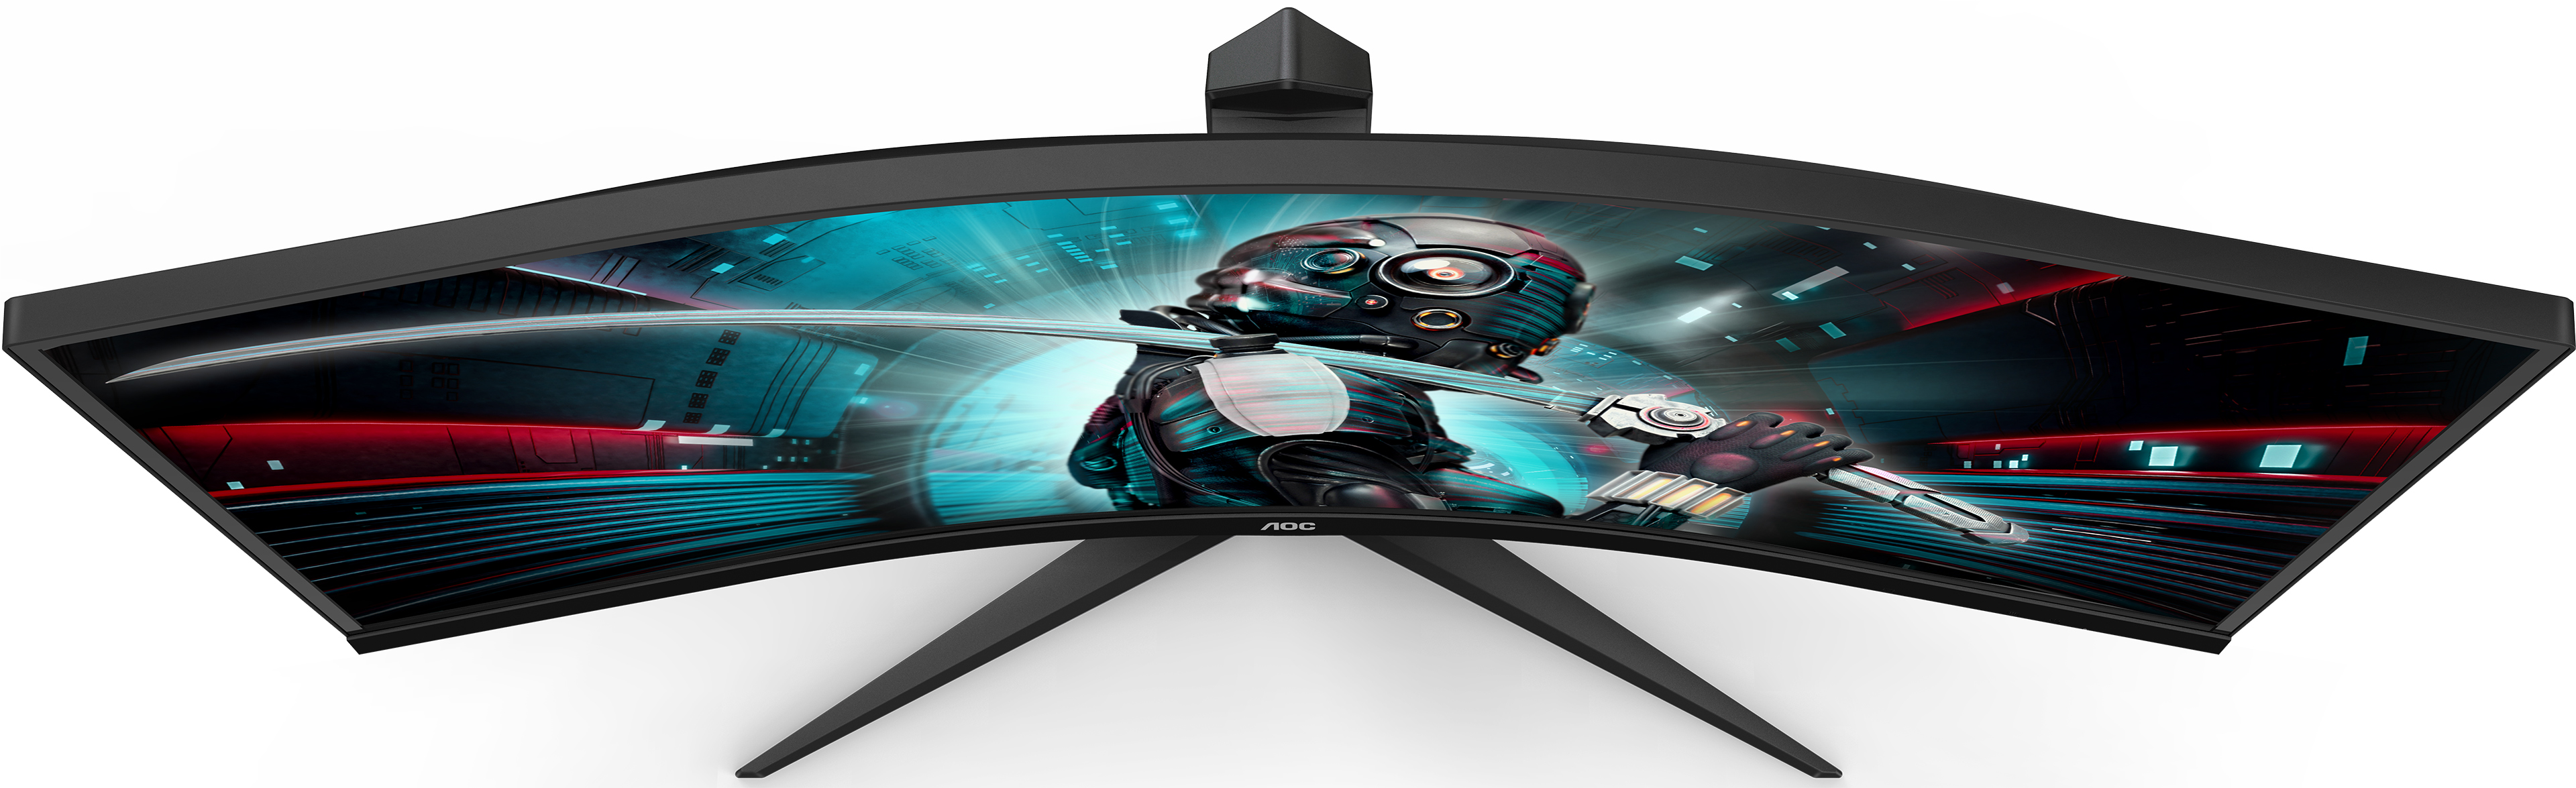 AOC Reveals Two 34-Inch Curved & Gaming Hz 144 to FreeSync Up Monitors